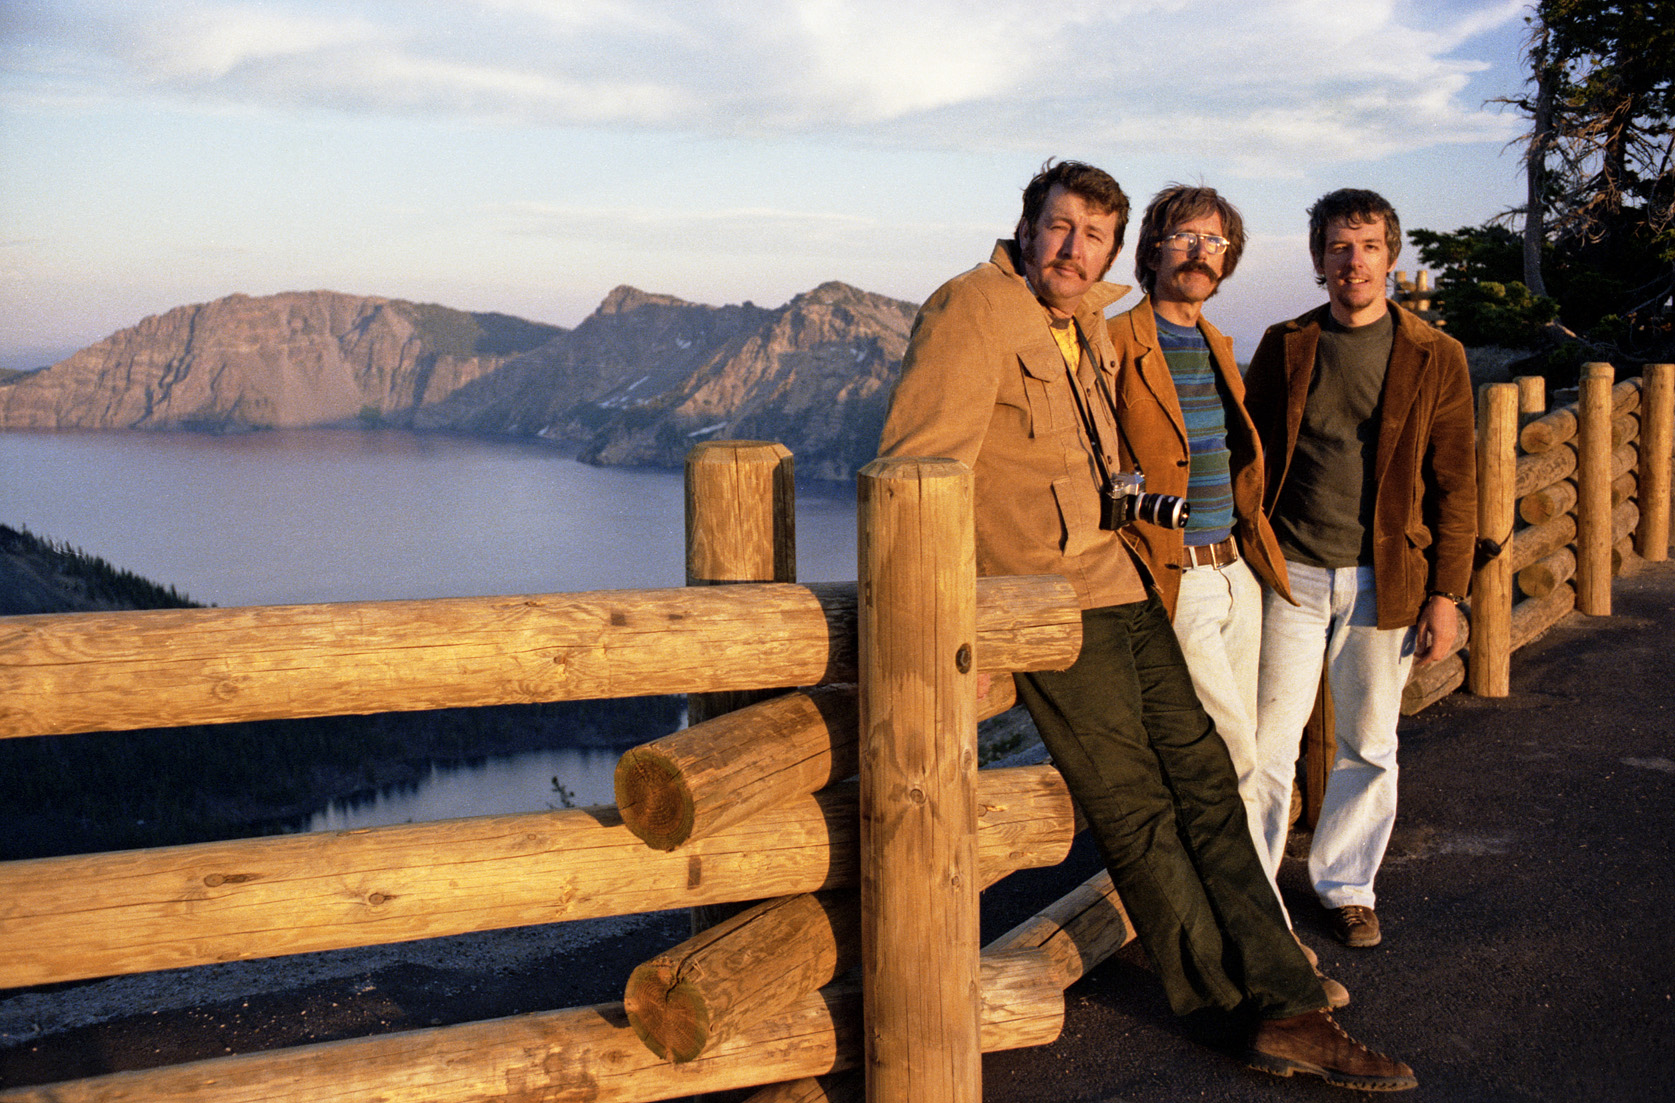 1975, Crater Lake, Oregon. A friend, my brother and me, captured during the golden hour. I shot this on 35mm Kodak Vericolor via self-timer. Lighting is everything, isn't it? View full size.